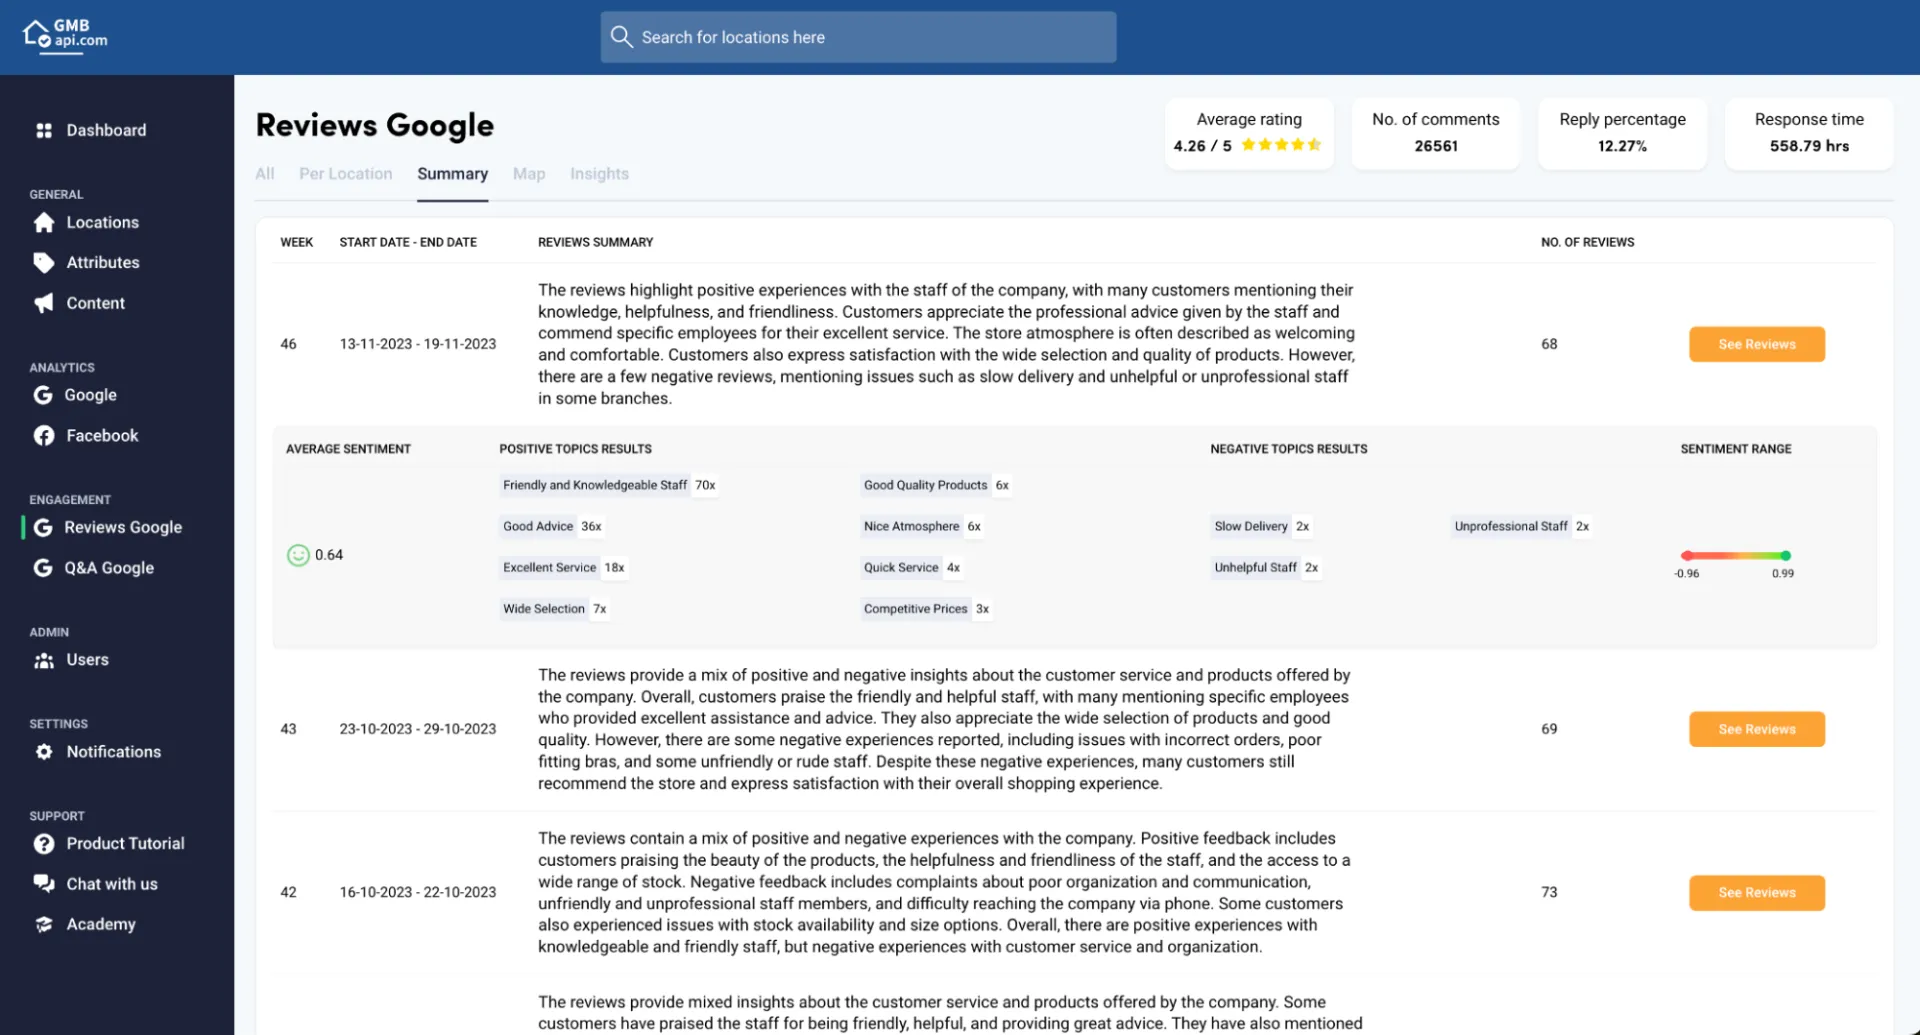 GMBapi Review Management - Review Summary with Topics and Sentiment Score